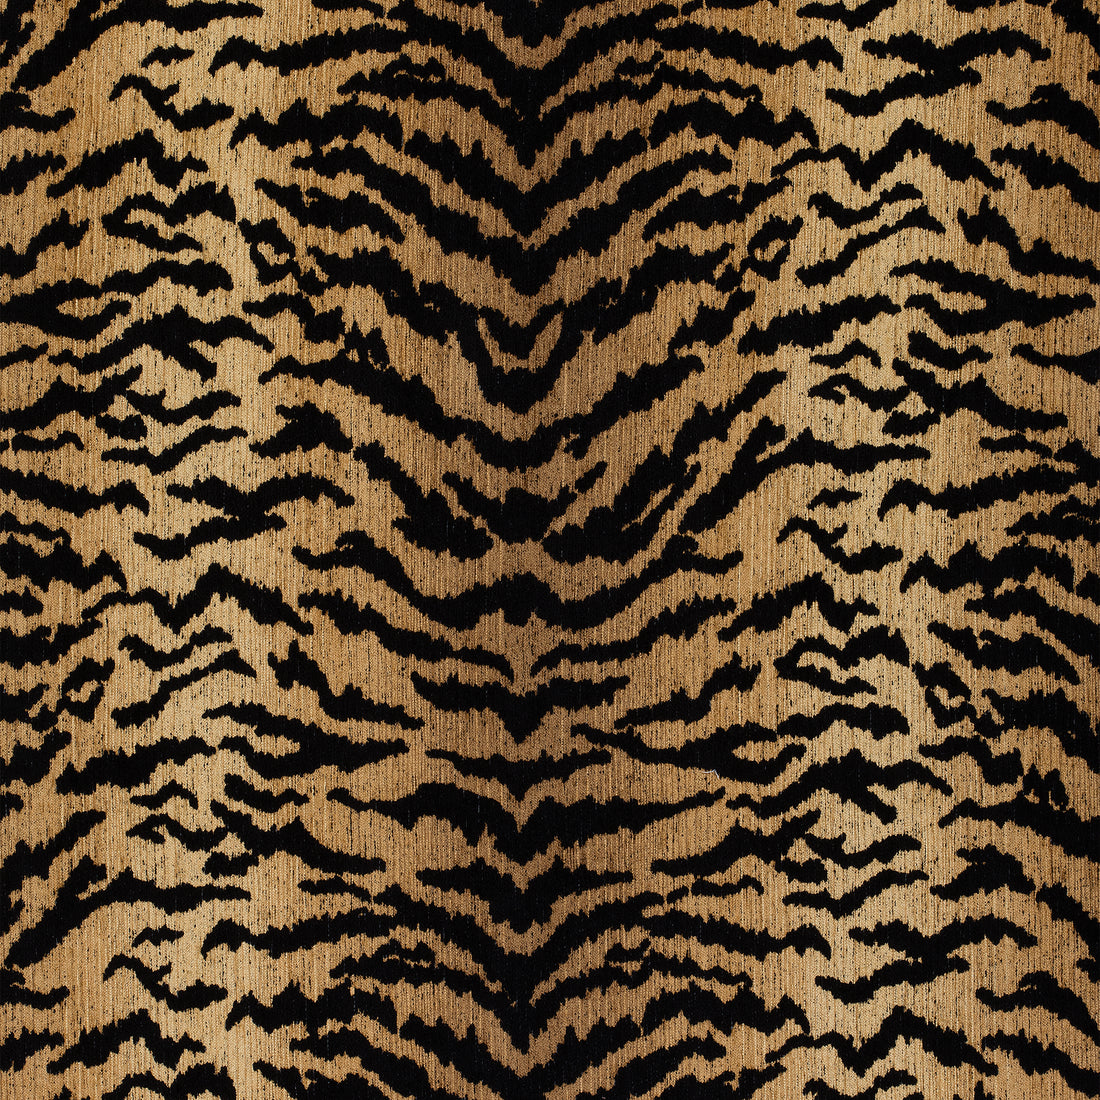 Aja fabric in black color - pattern number W80450 - by Thibaut in the Woven Resource Vol 10 Menagerie collection